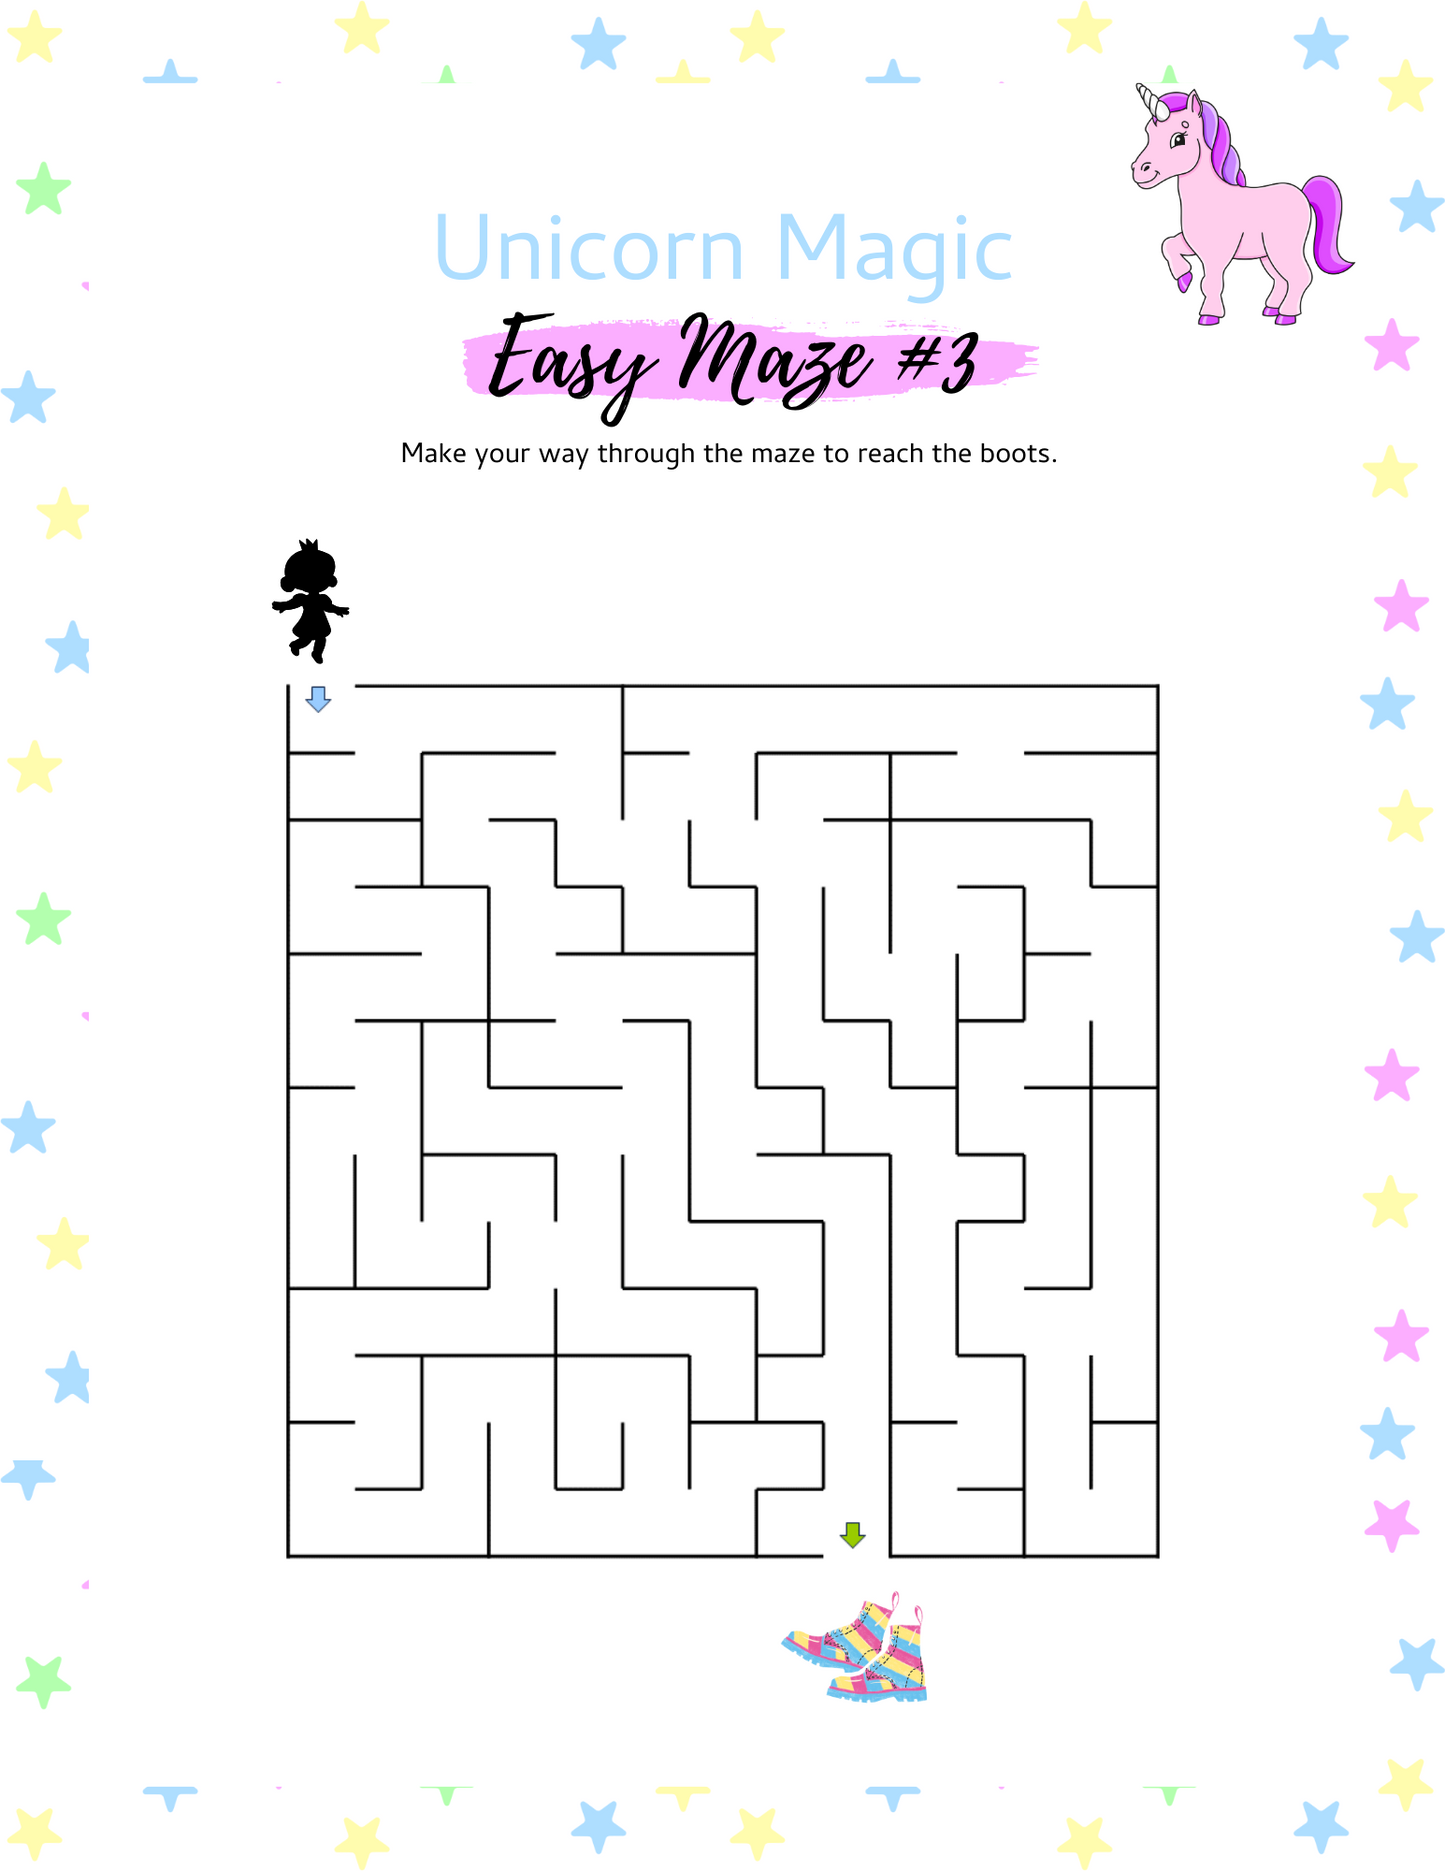 Unicorn Games and Coloring Pages with Solutions (92 Pages Total)